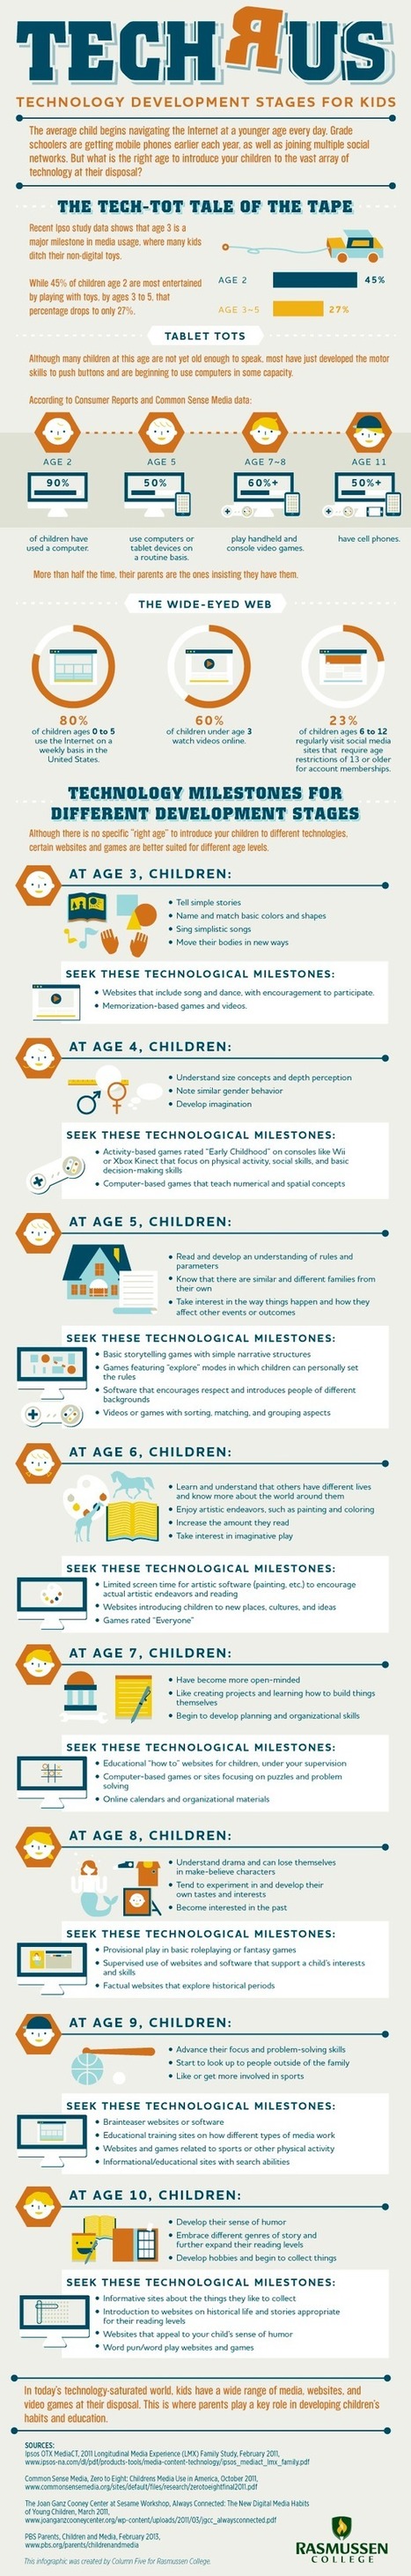 Educational Technology Development Stages for Children | Everything iPads | Scoop.it